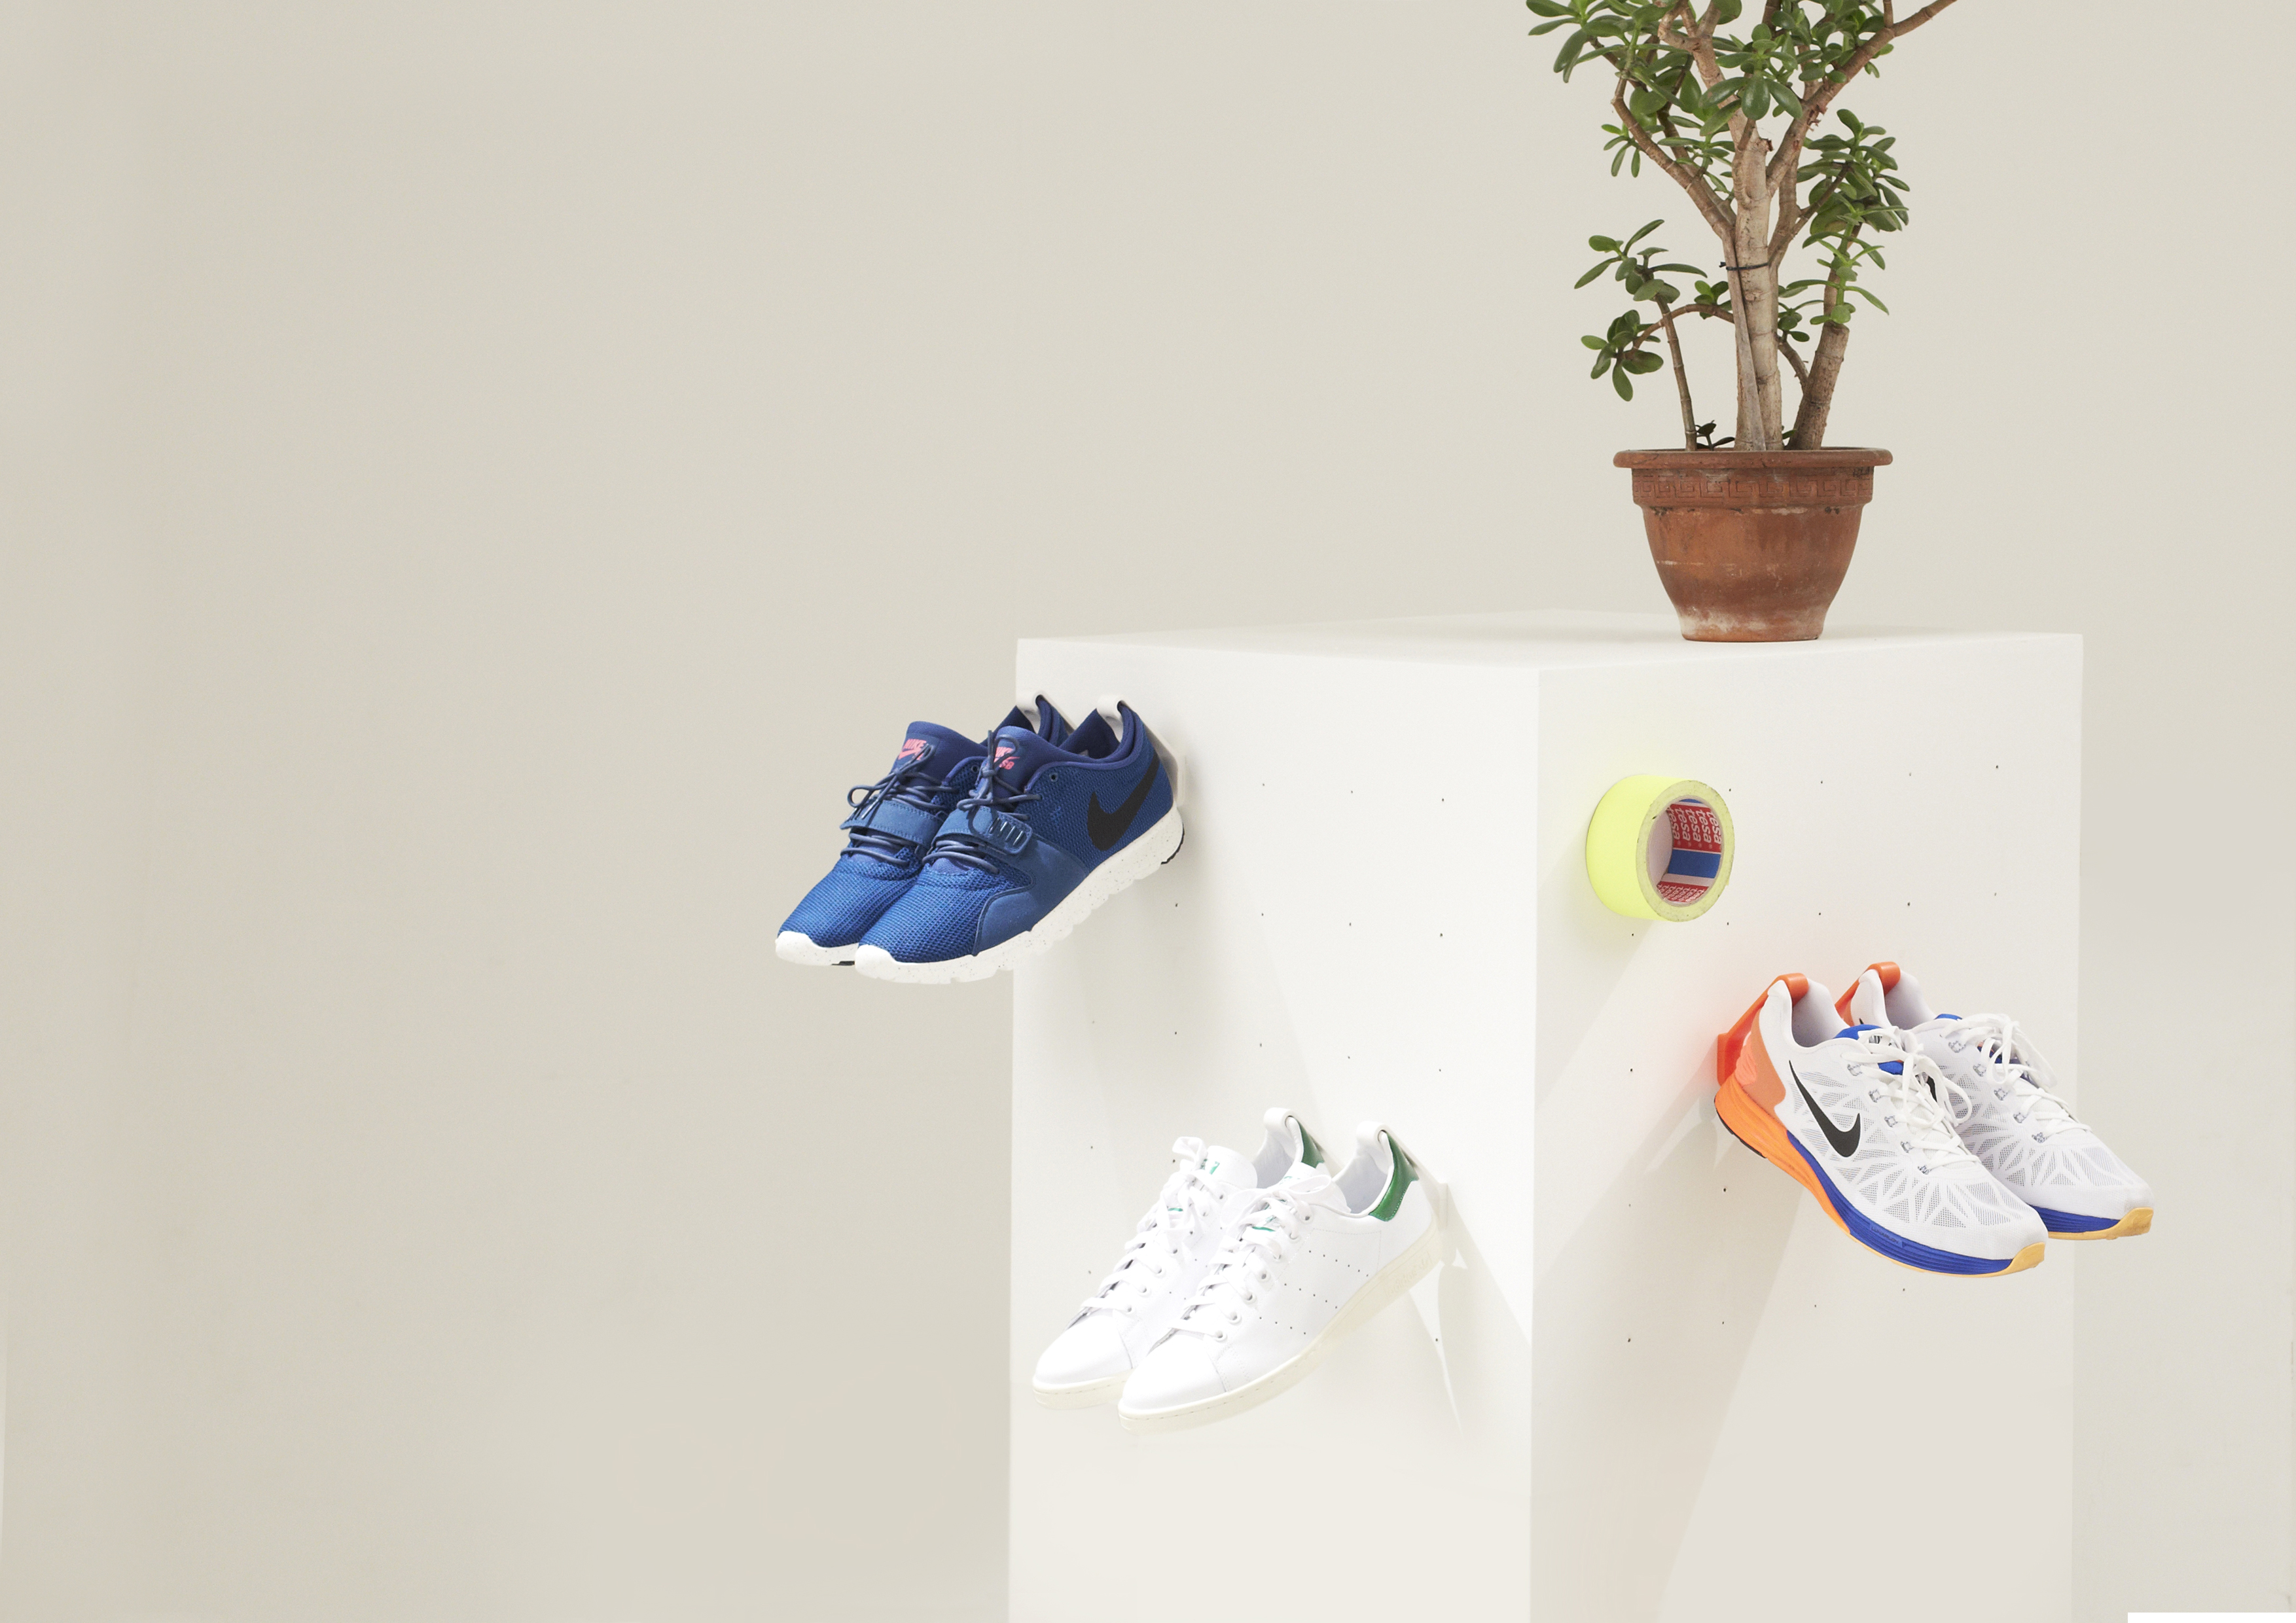 6 Staekler shoe storage hooks are mounted to a white column with a plant on top and hanging 3 pairs of sneakers.